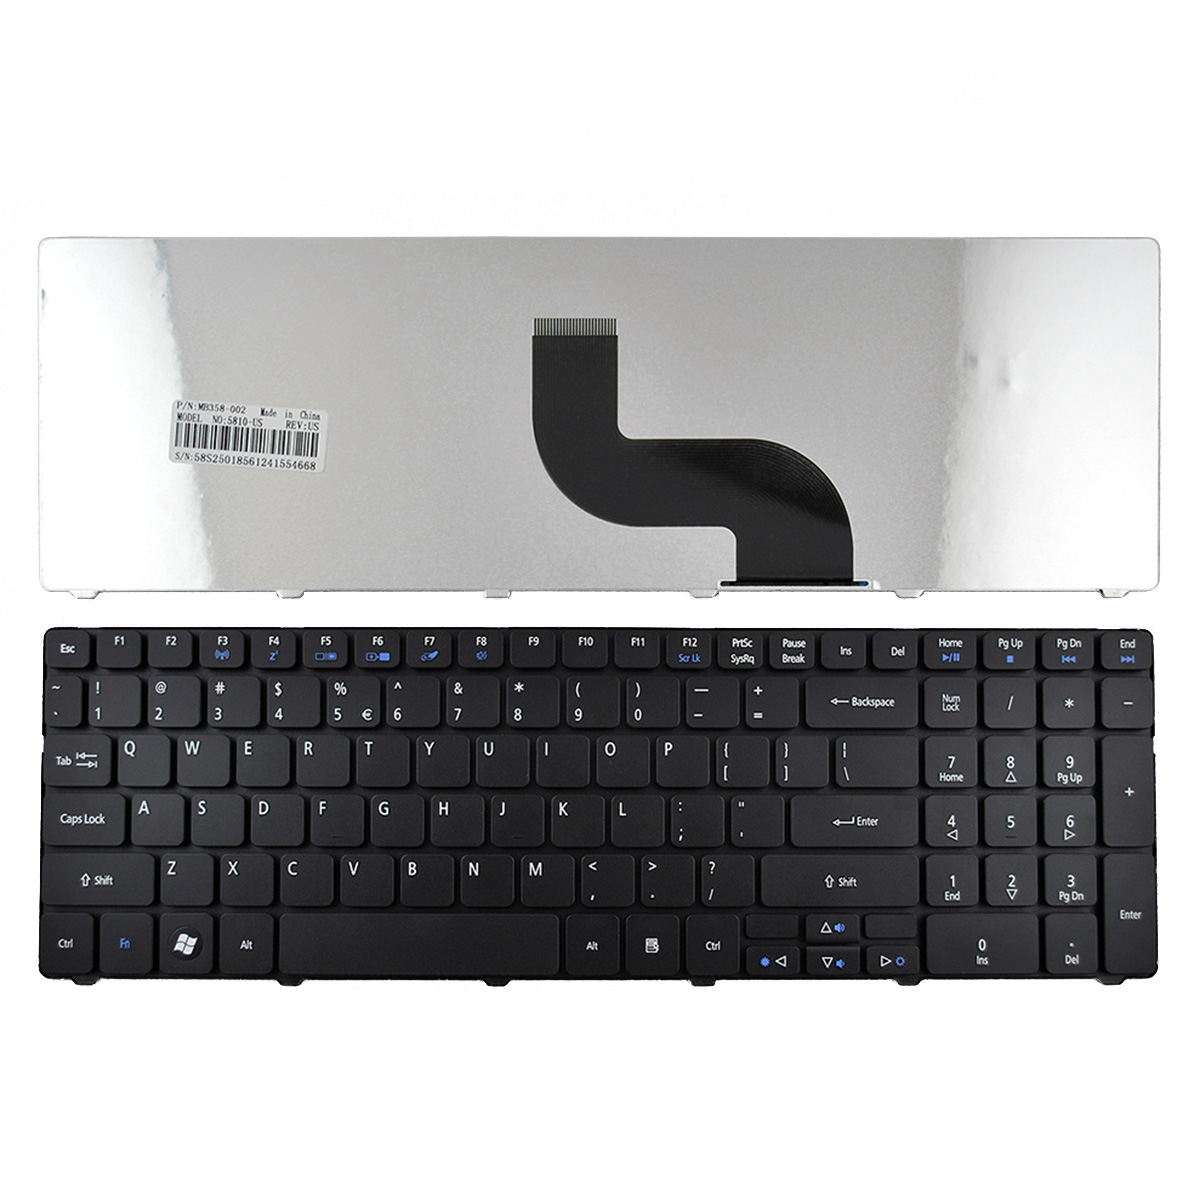 Keyboard Silicone Skin Cover Protector for Acer Aspire 5250 5251 5252 